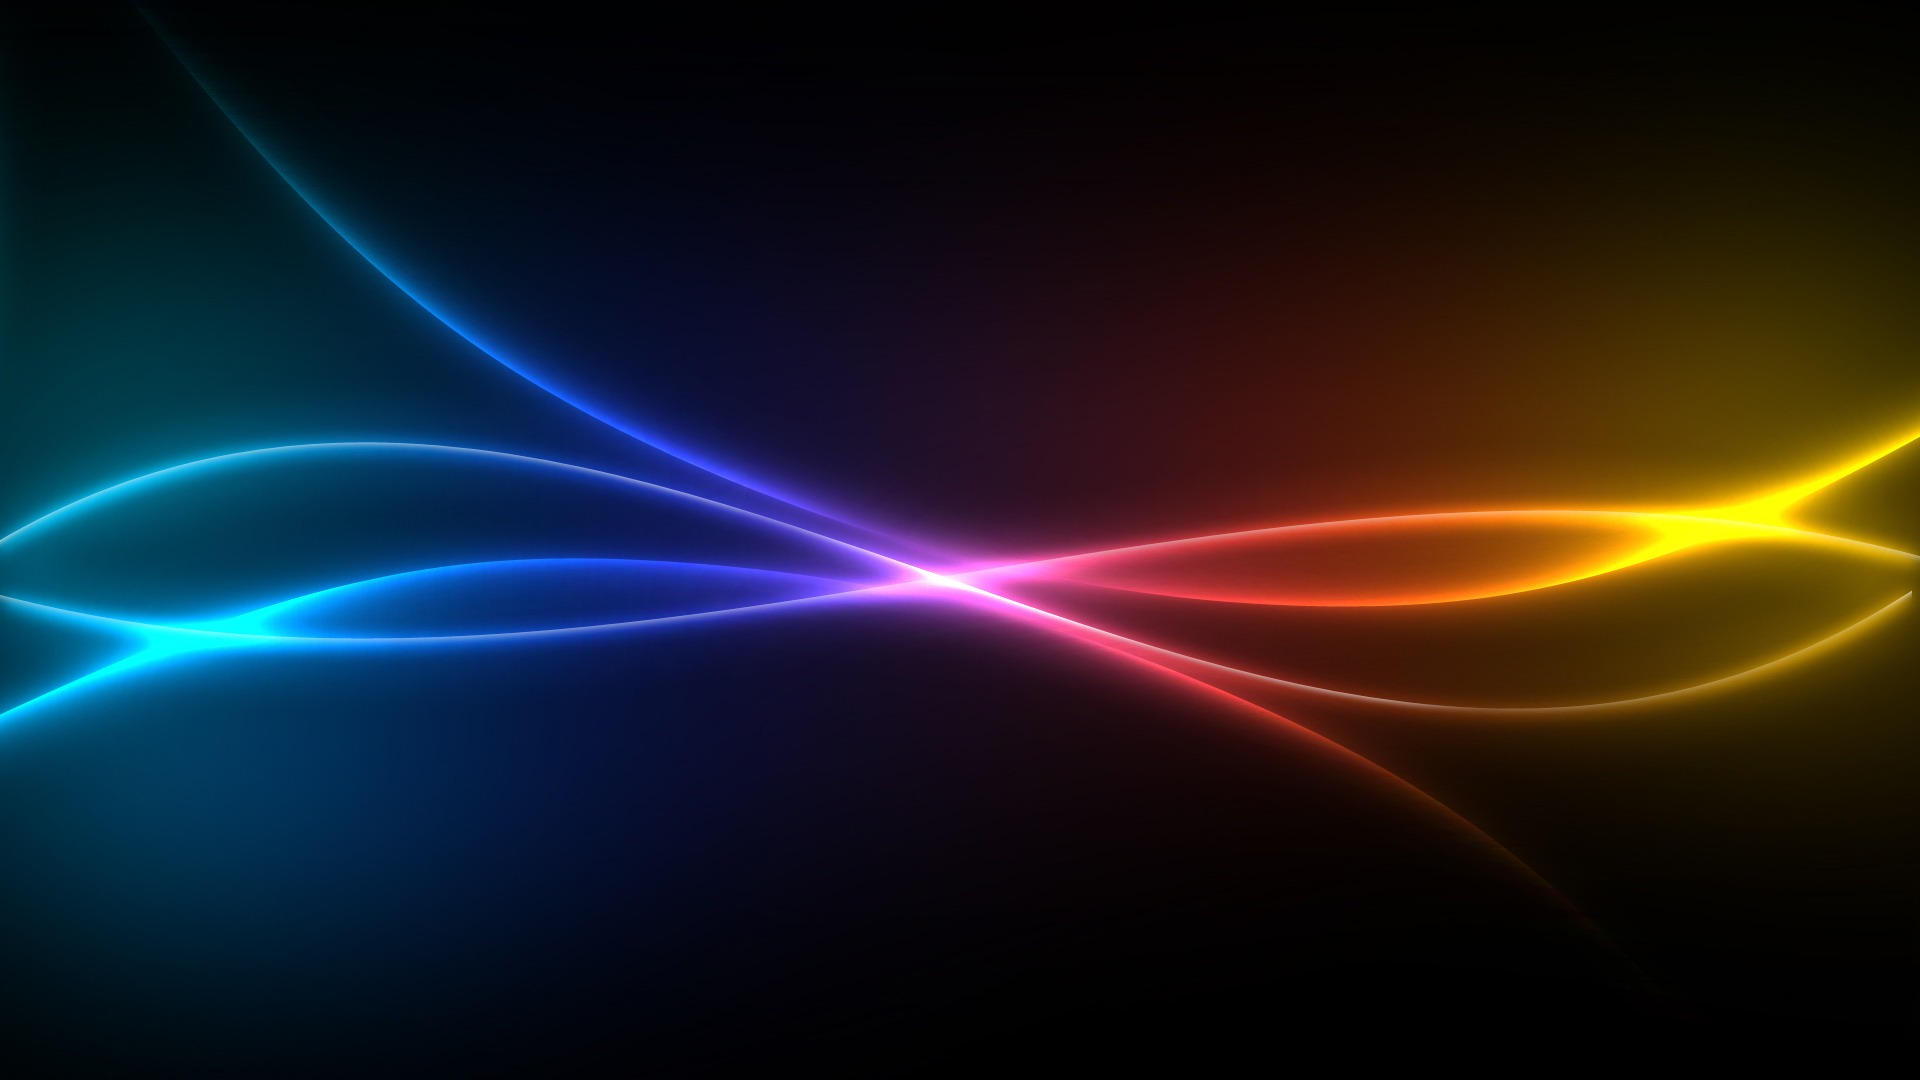 Cool Neon Backgrounds HD wallpaper background 1920x1080